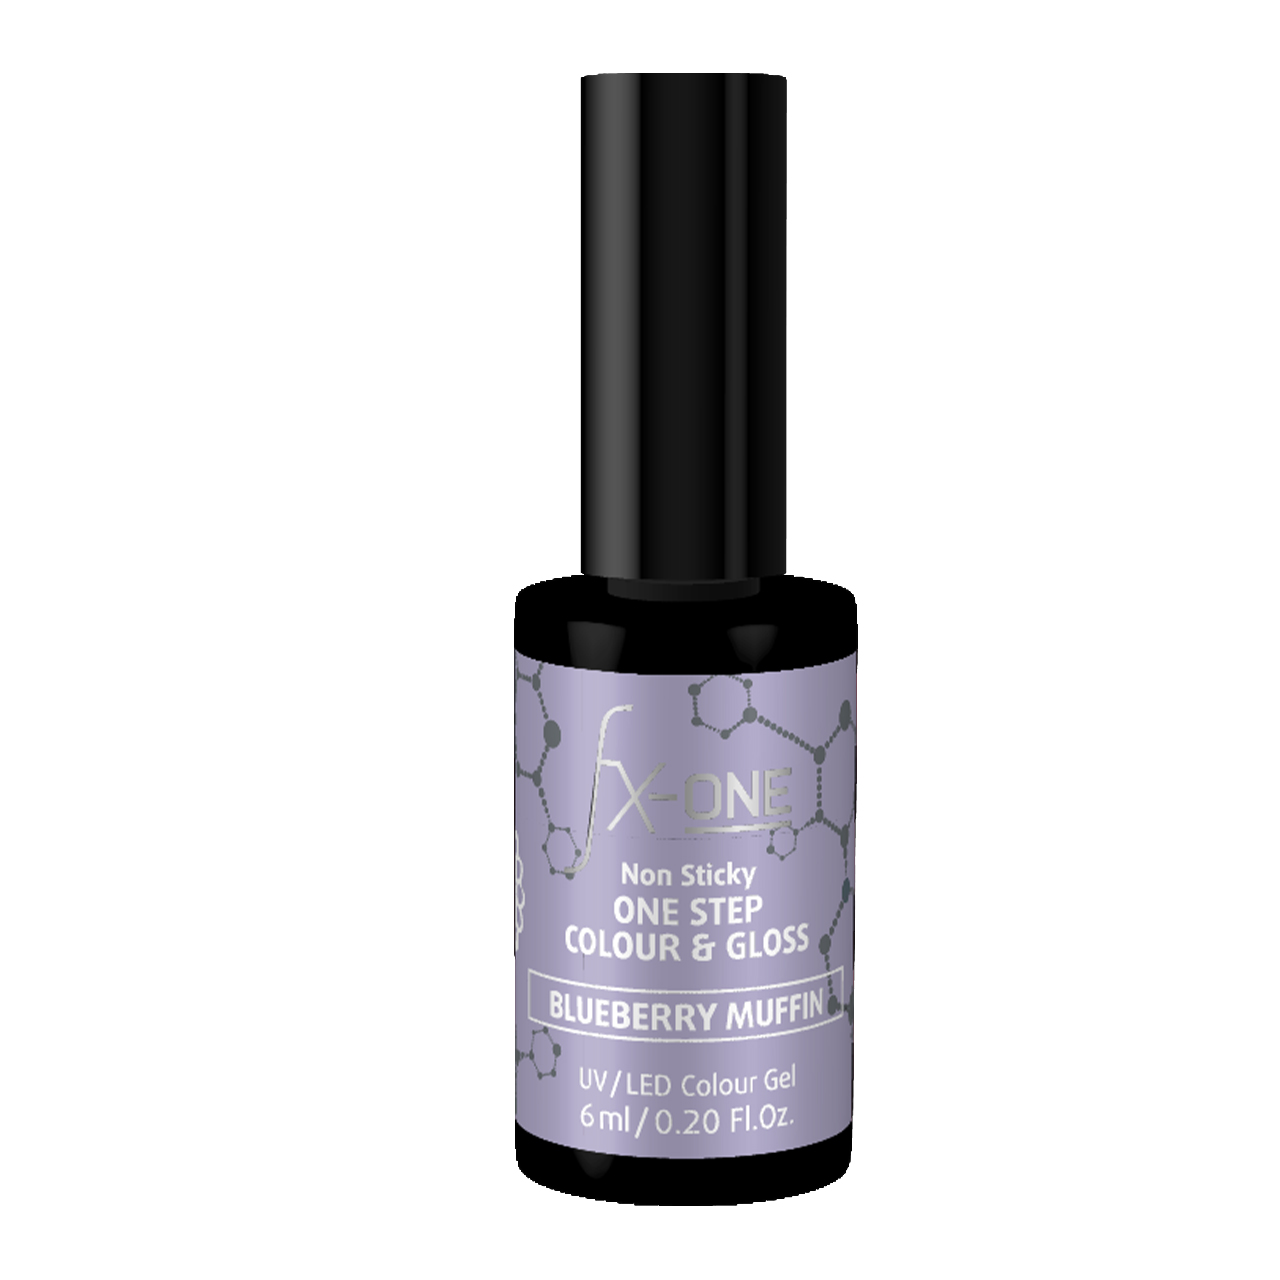 FX-ONE Colour & Gloss Blueberry Muffin 6ml